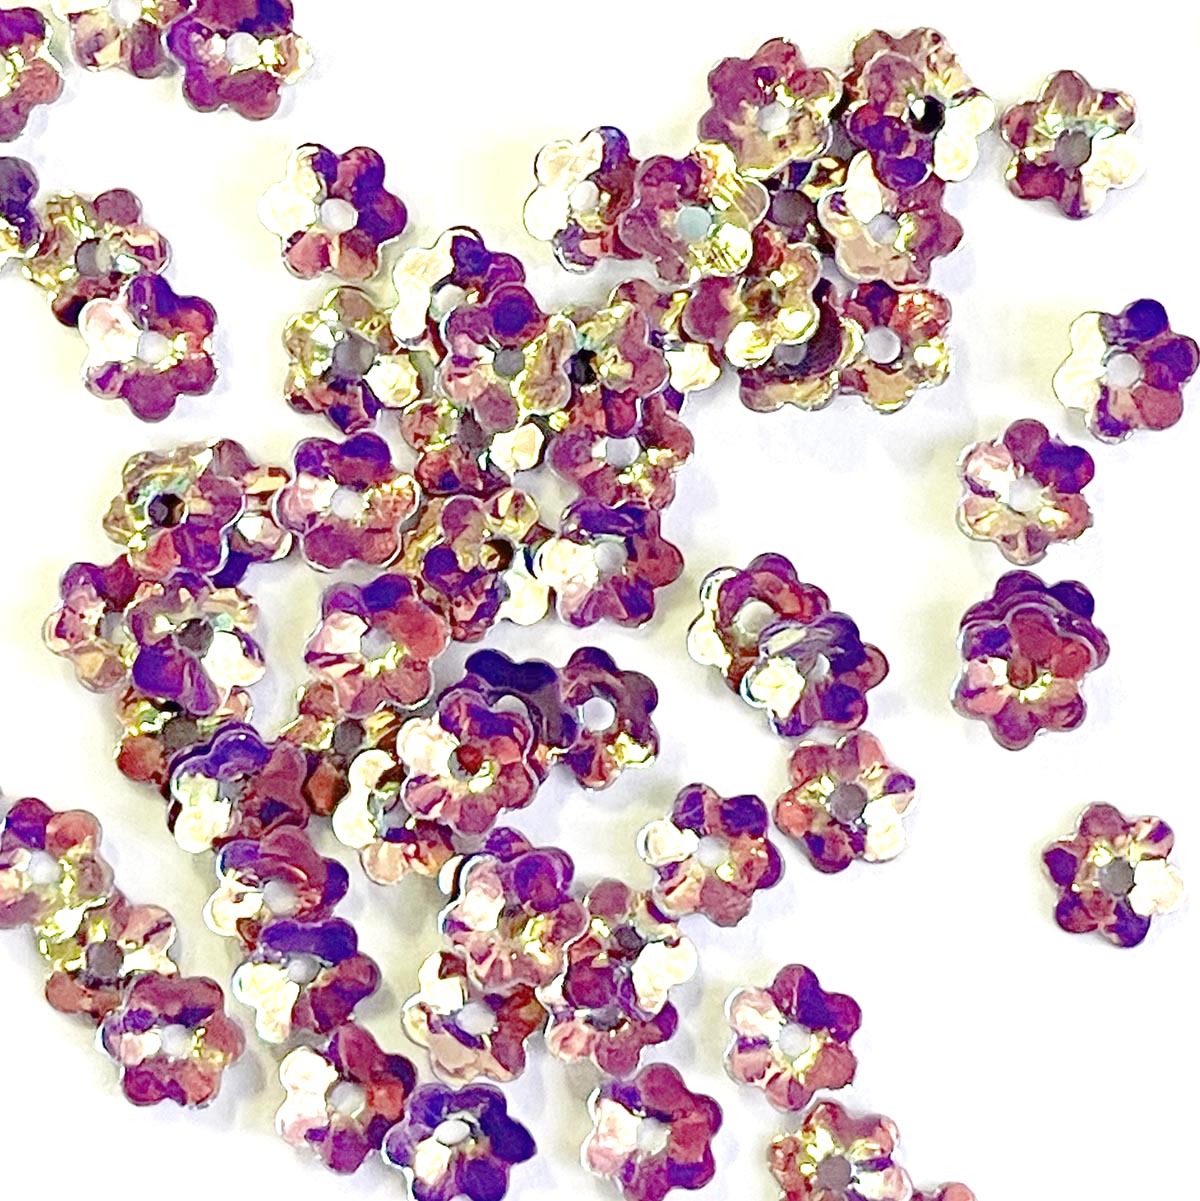 www.colourstreams.com.au Colour Streams Sequins Embellishments Costumes Mardi Gras Dancing Ballet Theatre Shows Drag Queen Bling S195 Opaque Flower Shape Mauve with Green and Copper Lights Iridescent Reflections Shiny 5mm